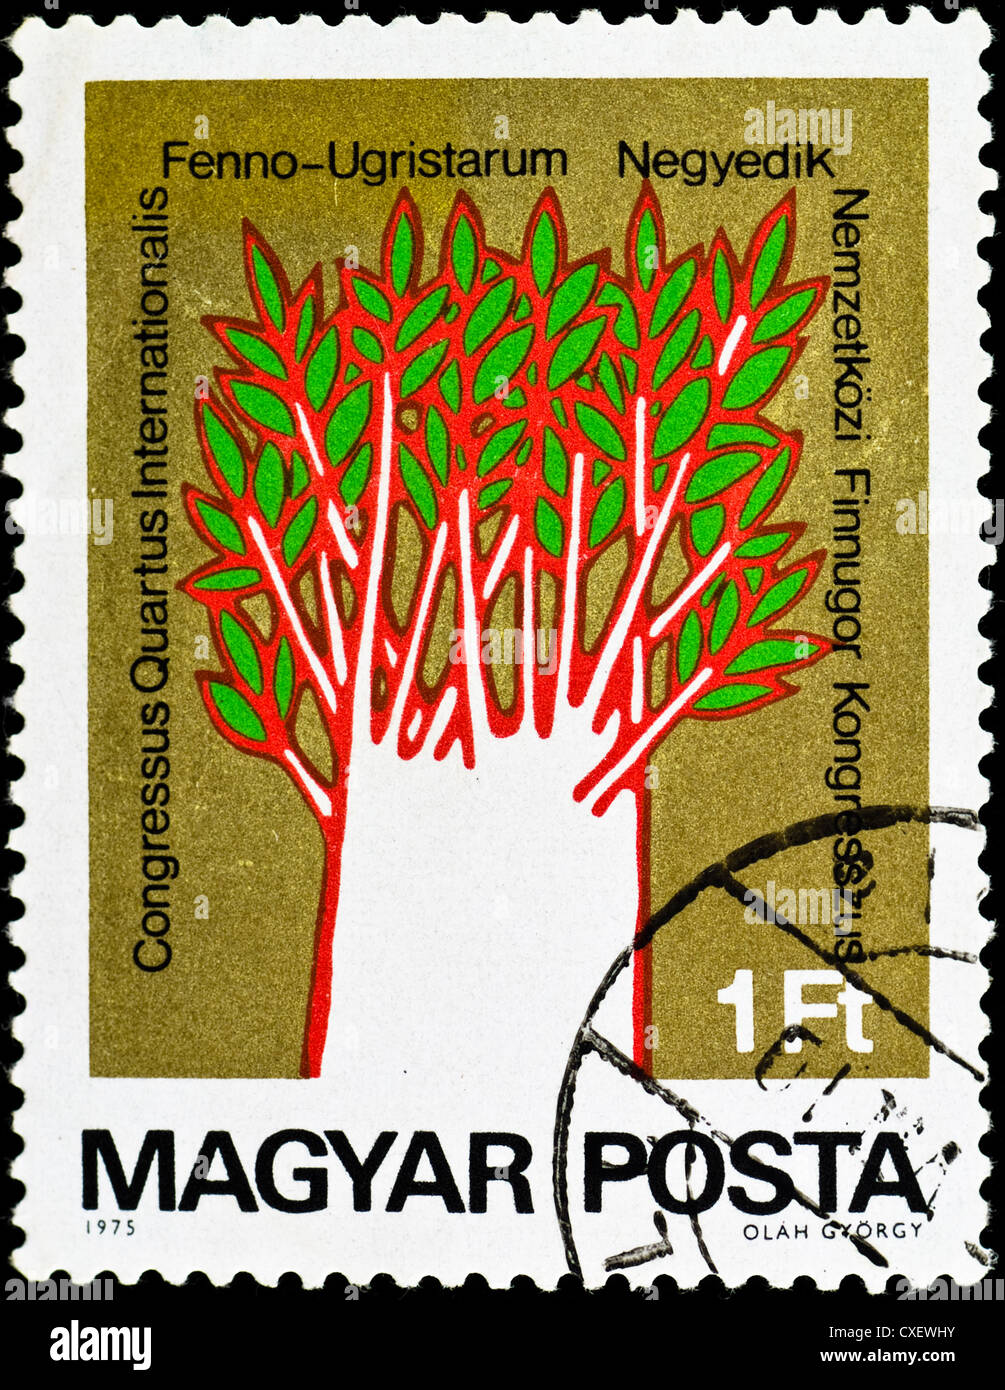 postage stamp show unusual painting tree Stock Photo